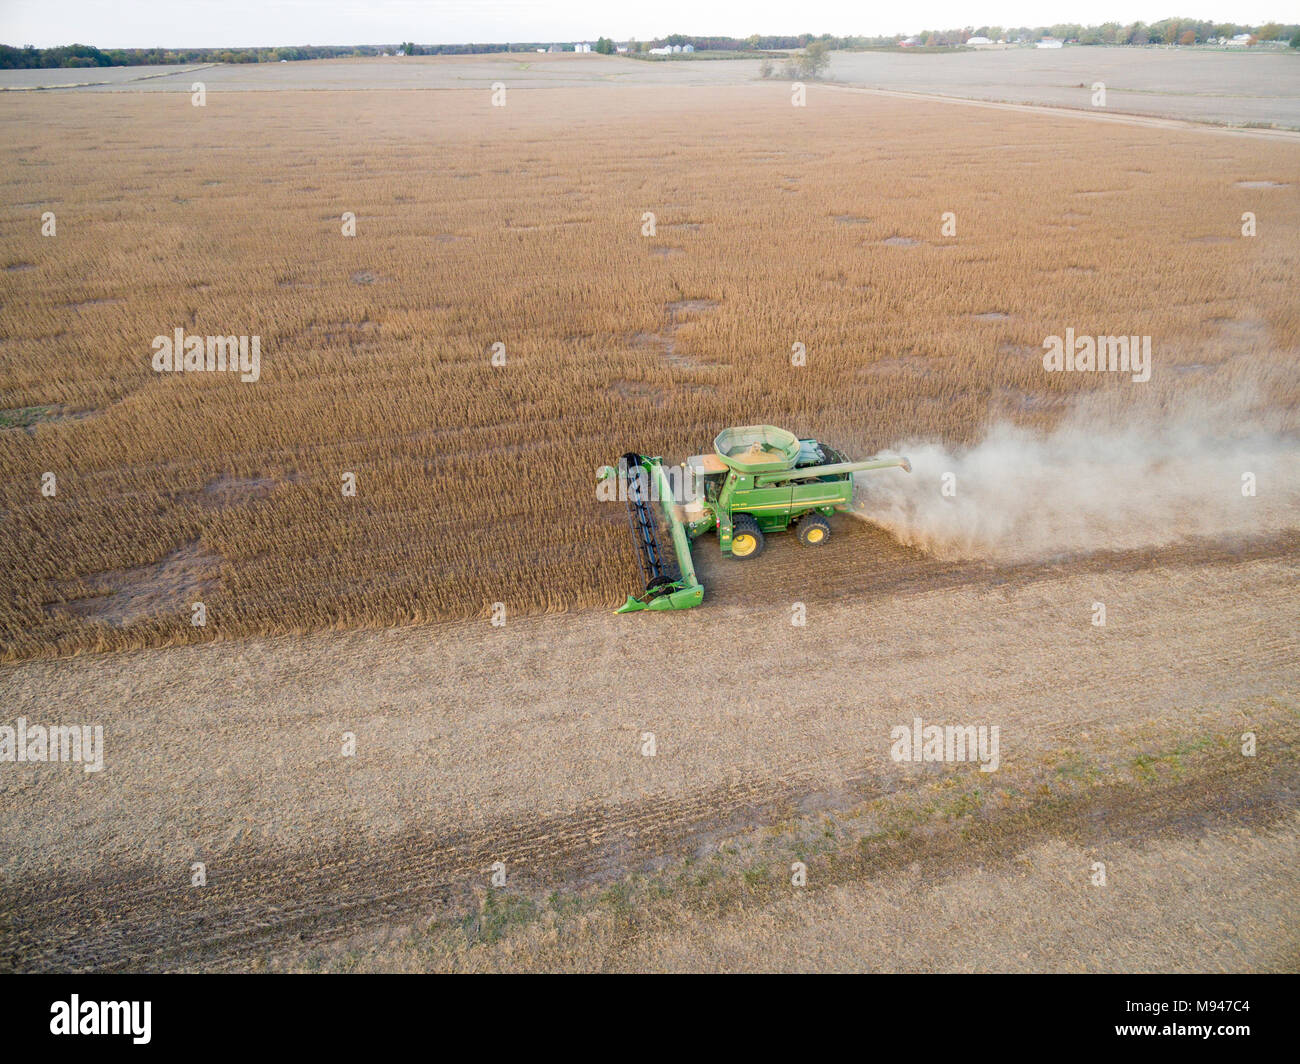 63801-09612 Soybean Harvest, John Deere combine harvesting soybeans - aerial - Marion Co. IL Stock Photo